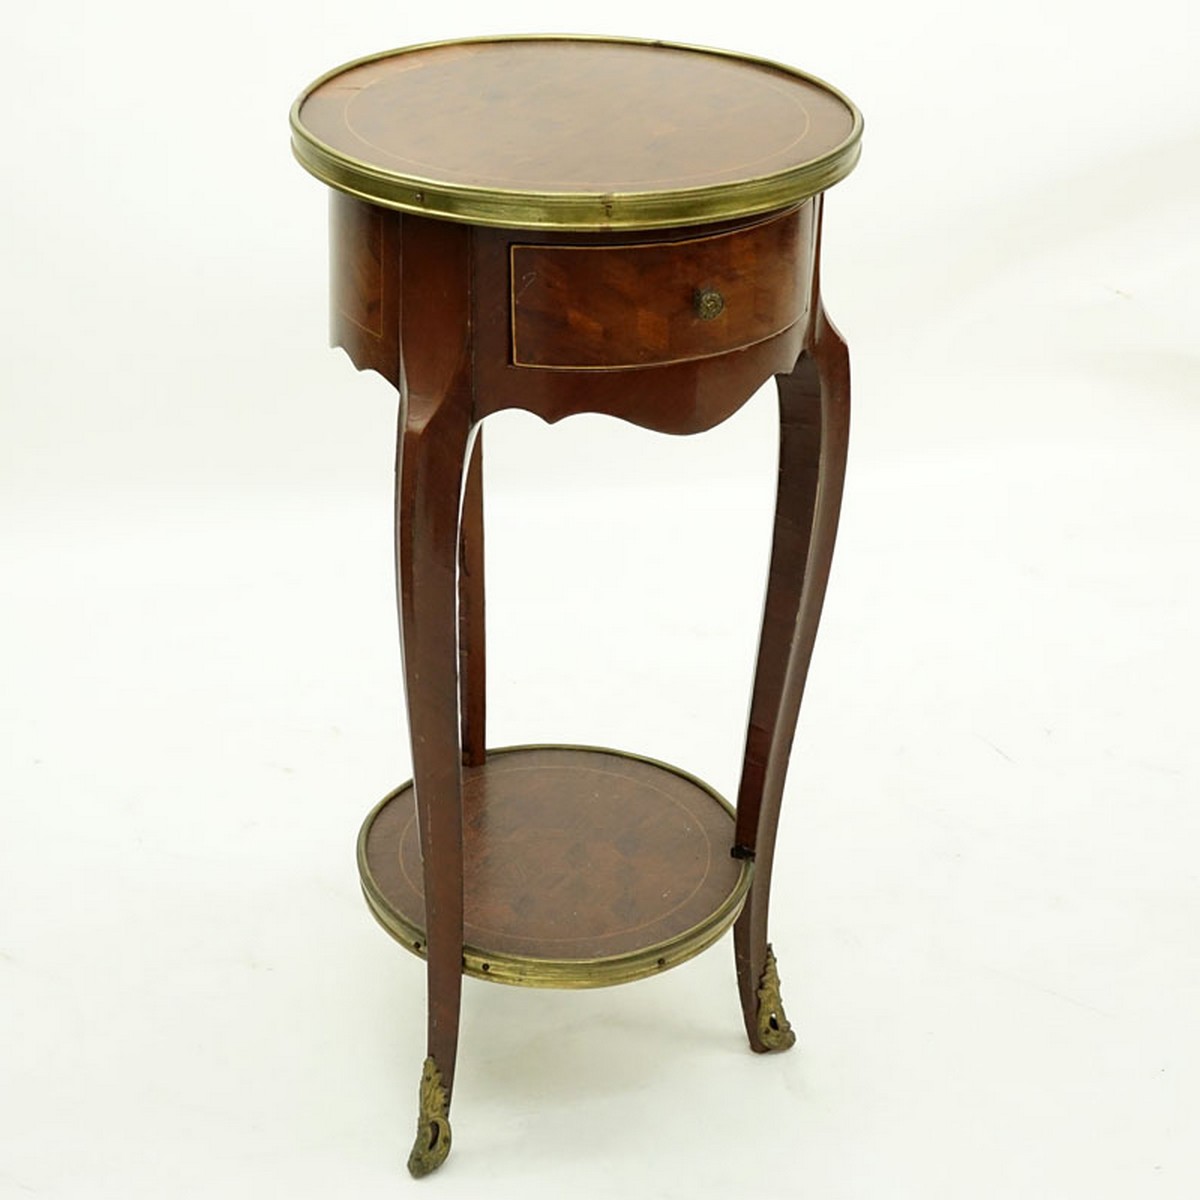 20th Century French Louis XVI Style Parquetry Inlaid Gilt Brass Round Side Table. Single fitted sliding drawer with shelf stretcher.